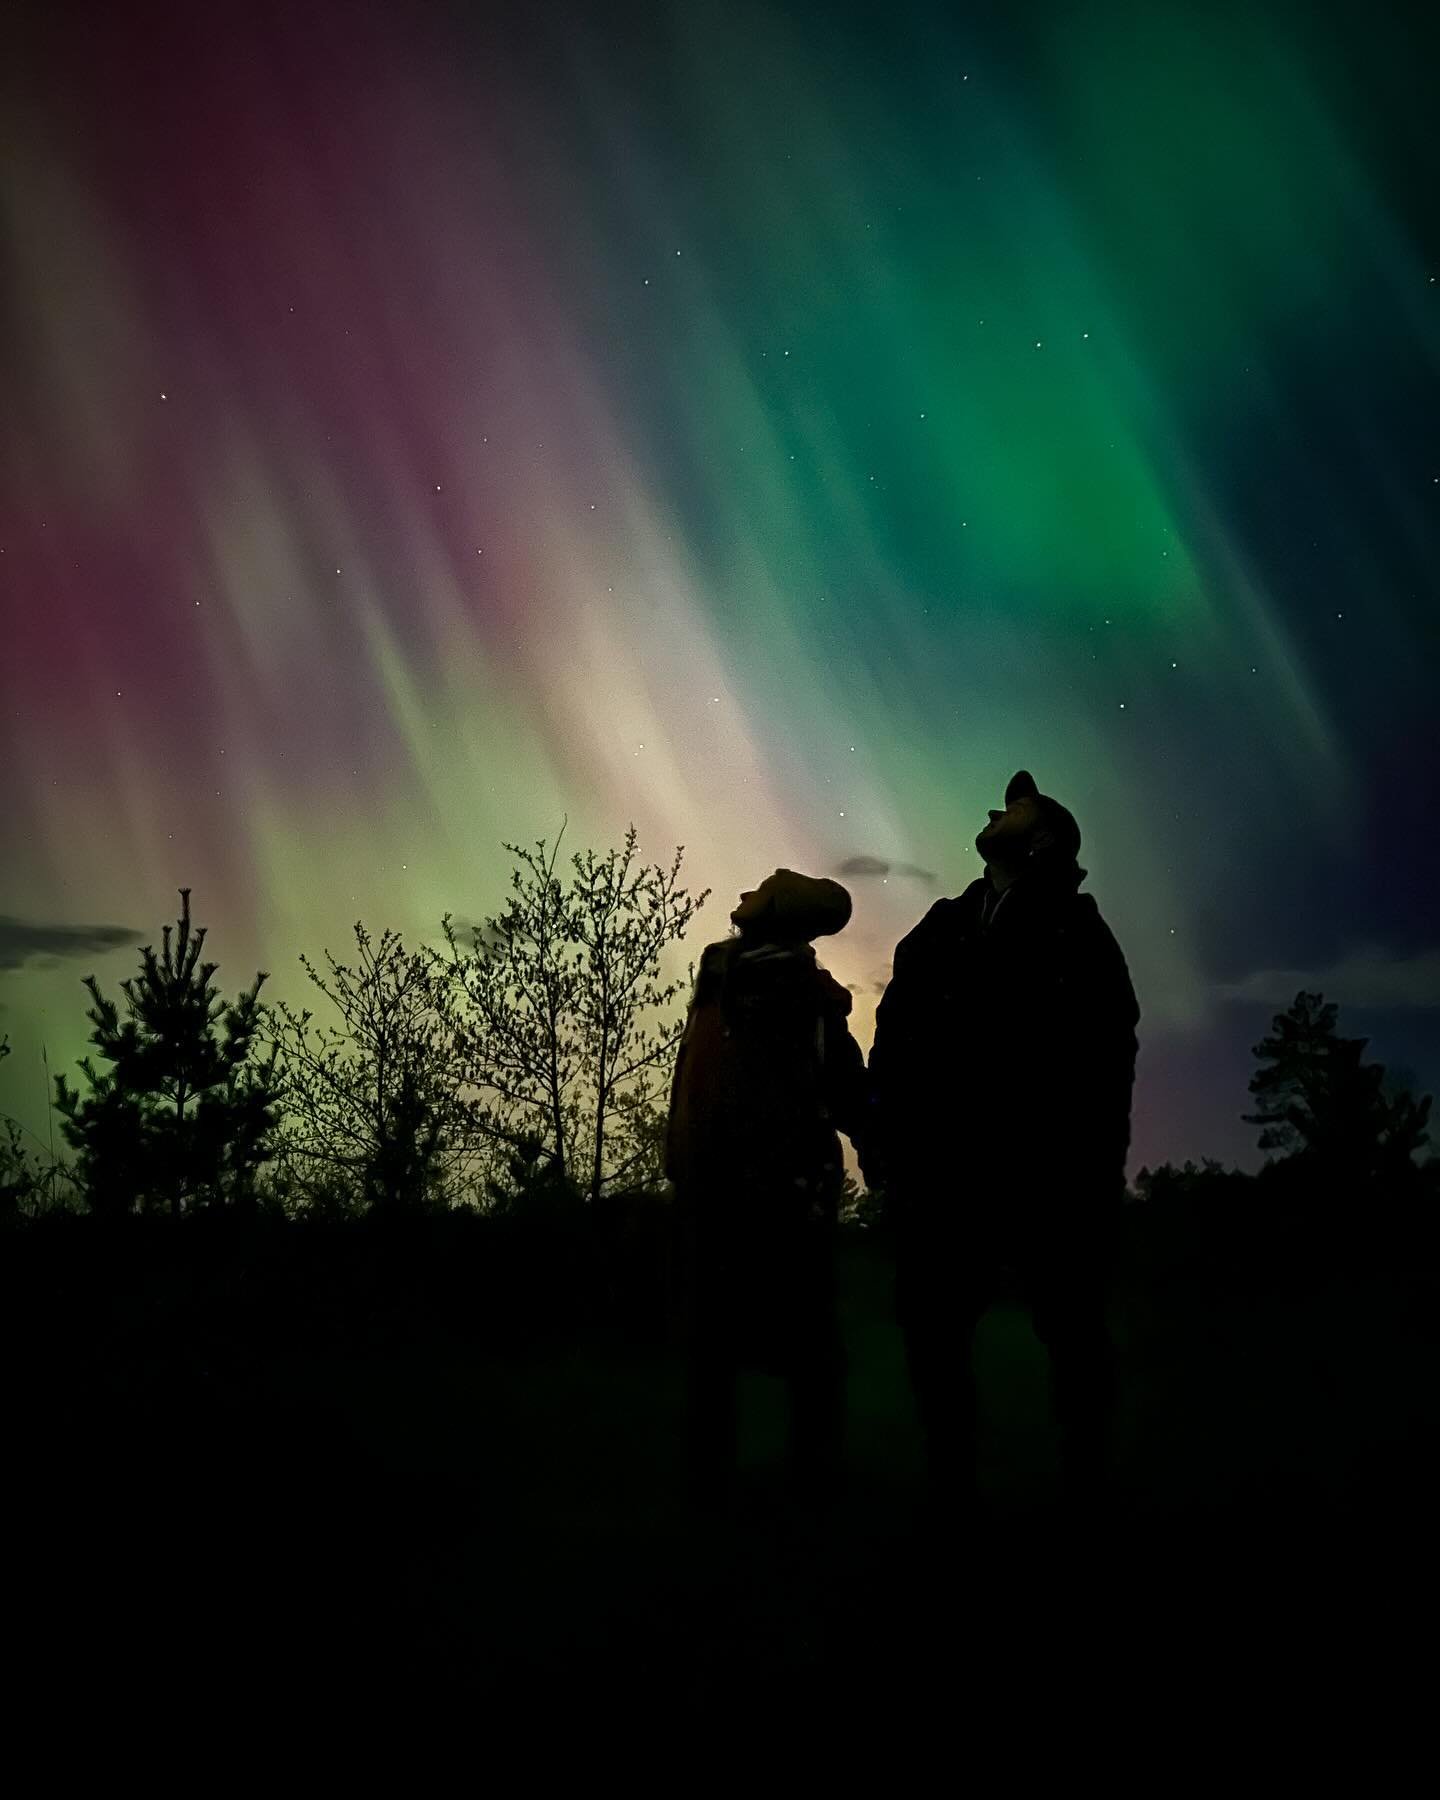 Still in absolute disbelief from the night we had seeing the northern lights together! I&rsquo;ve lived in Minnesota for nearly 20 years and this was my first time ever getting to see them in person and boy oh boy it did not disappoint!

I have so ma